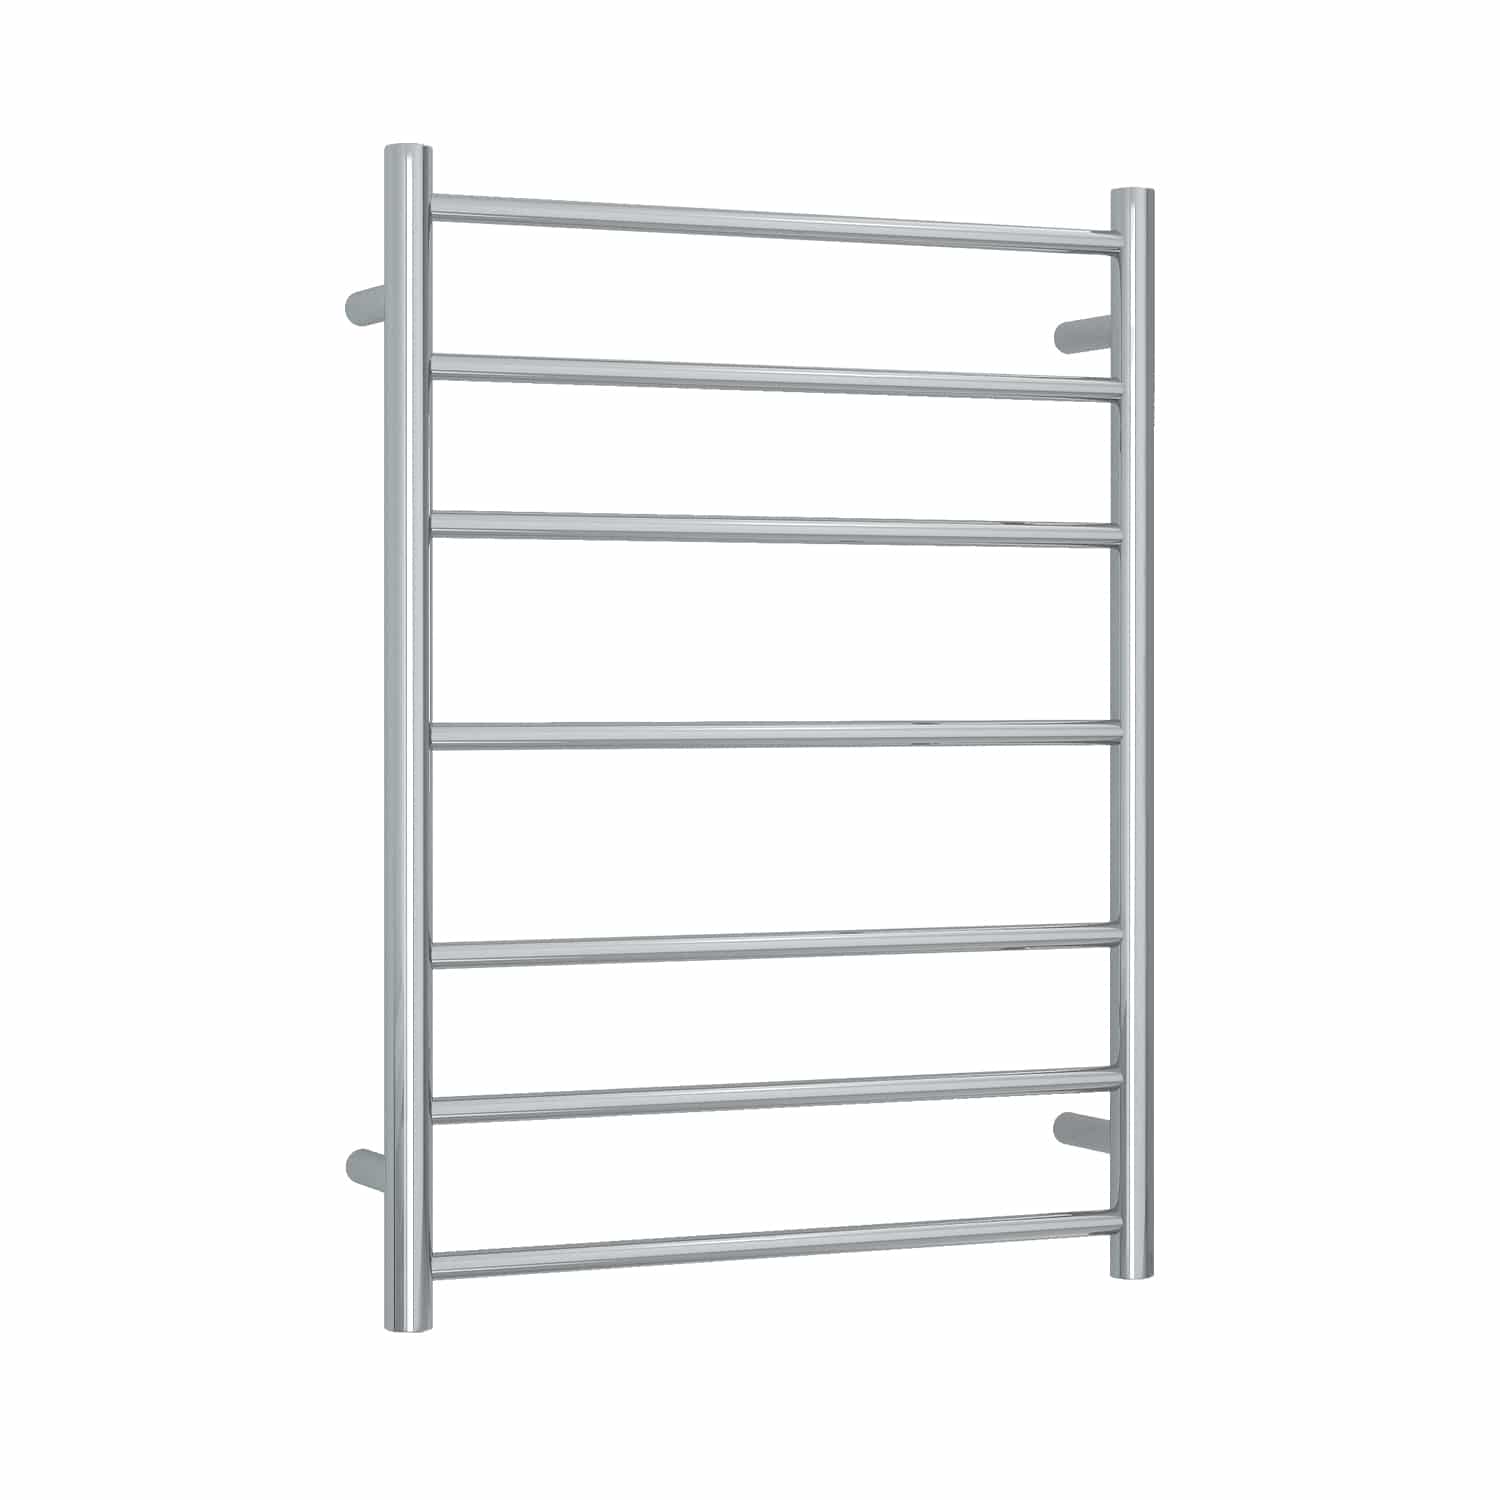 Thermogroup Straight Round 7 Bar Heated Towel Ladder Brushed Stainless Steel SRB4412